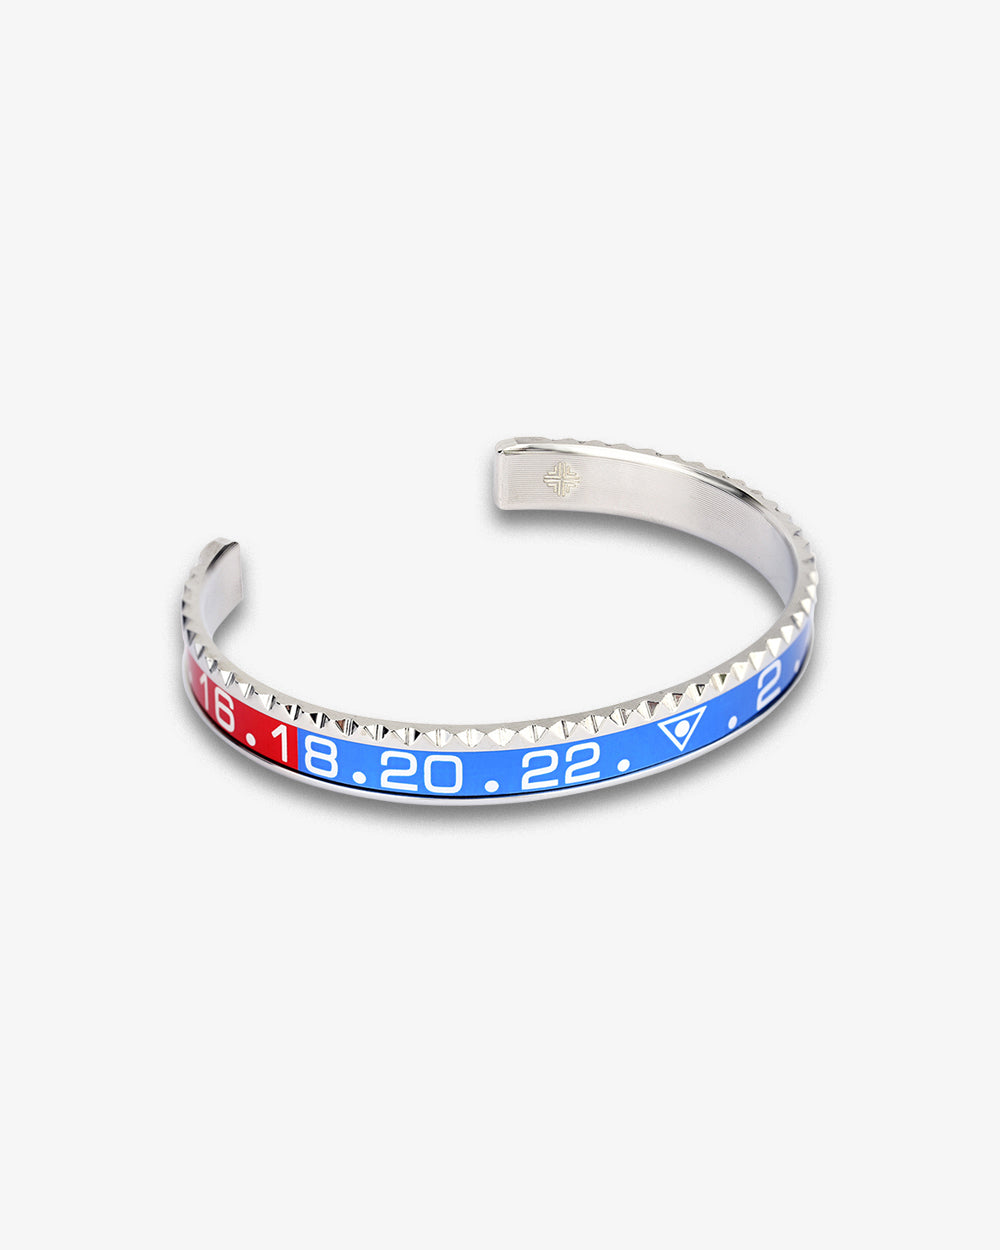 Swiss Concept Classic Dual Time GMT II 'Pepsi' Speed Bracelet (Stainless Steel) - Polished Finish